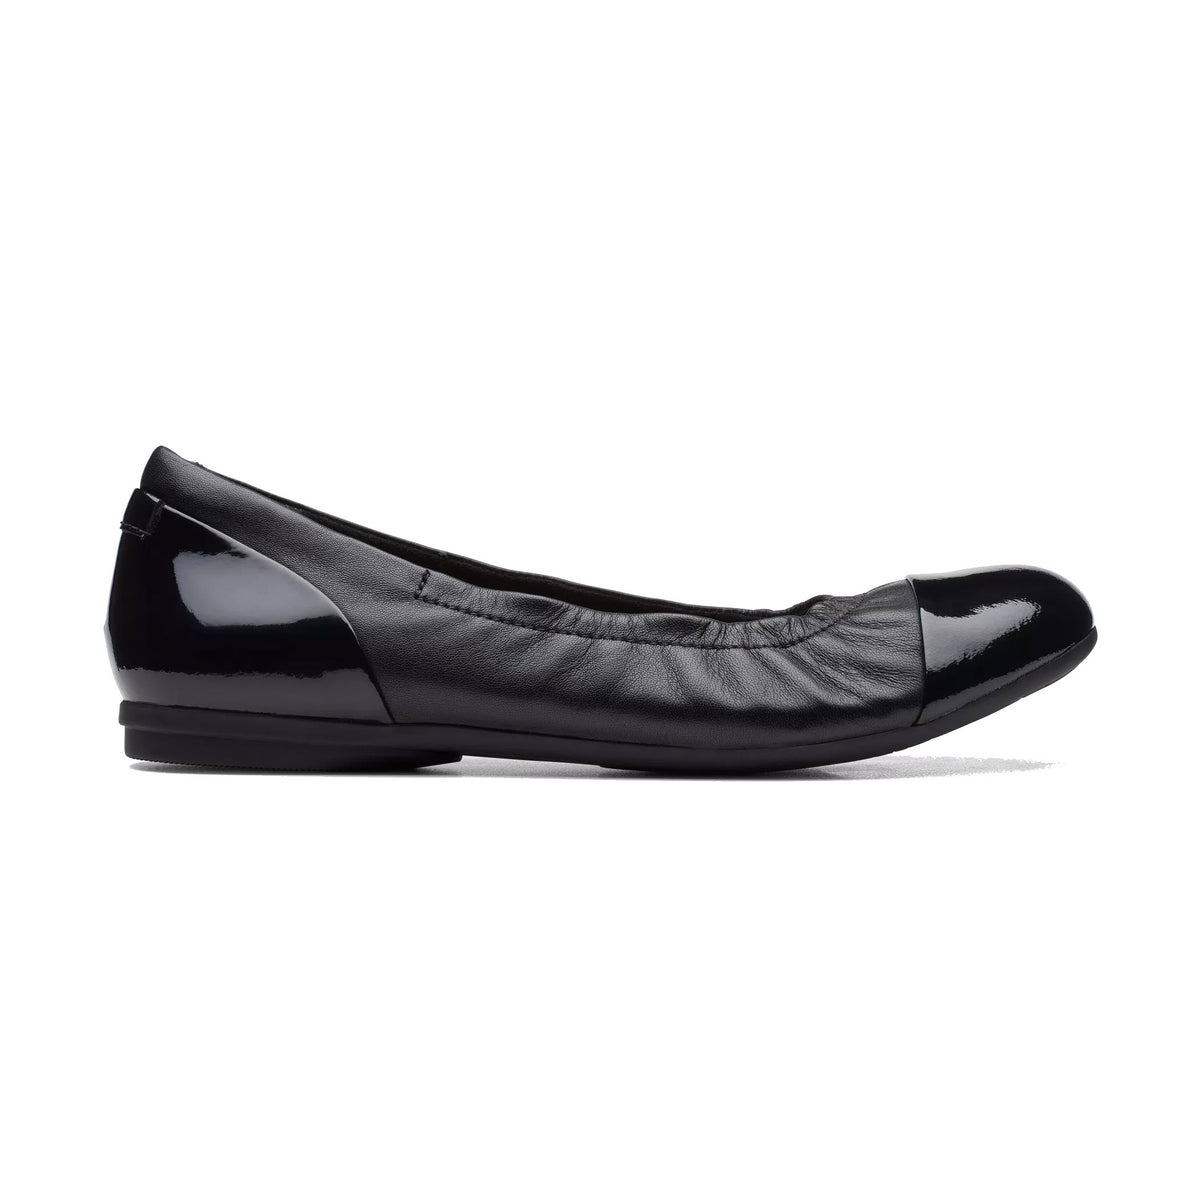 A side profile of a Clarks Rena Jazz black - women&#39;s ballet flat with a shiny toe cap and a soft leather design on a white background.